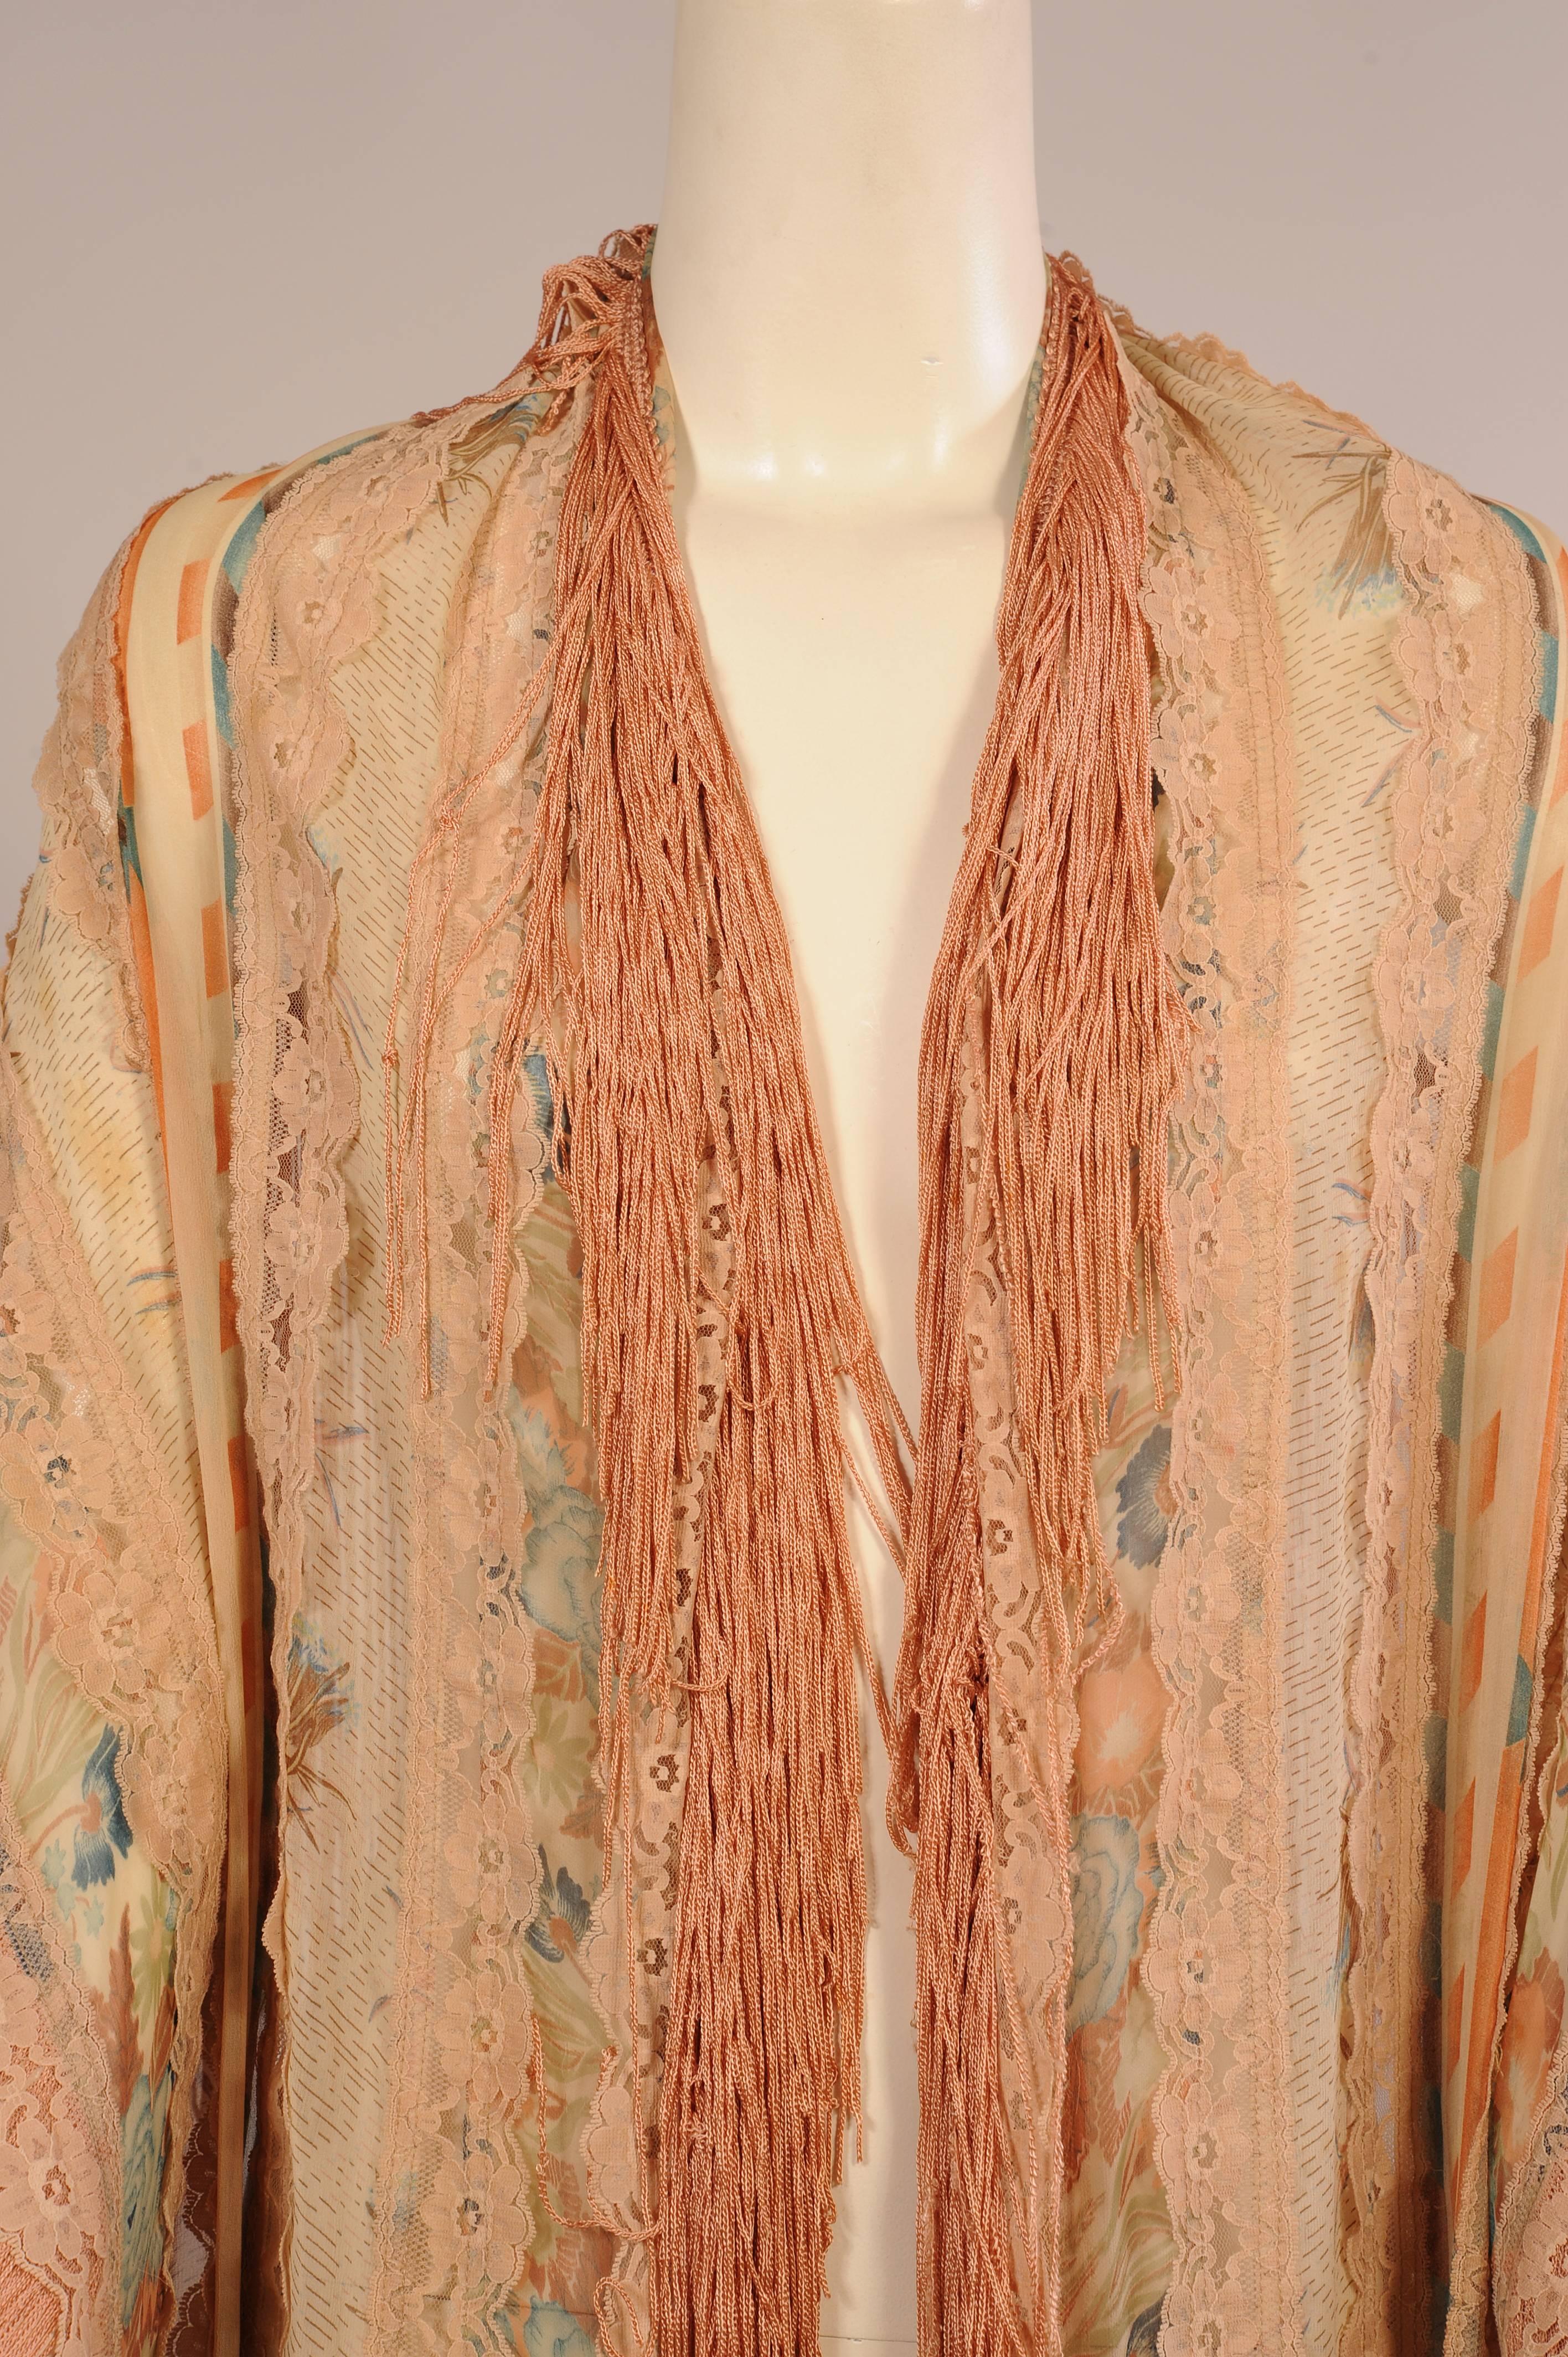 A combination of floral printed and geometric designed chiffon fabrics alternate with bands of cream lace. This lace edges the shawl just above the pale coral fringe on all four sides. It is in excellent condition.
Measurements;
Length 84